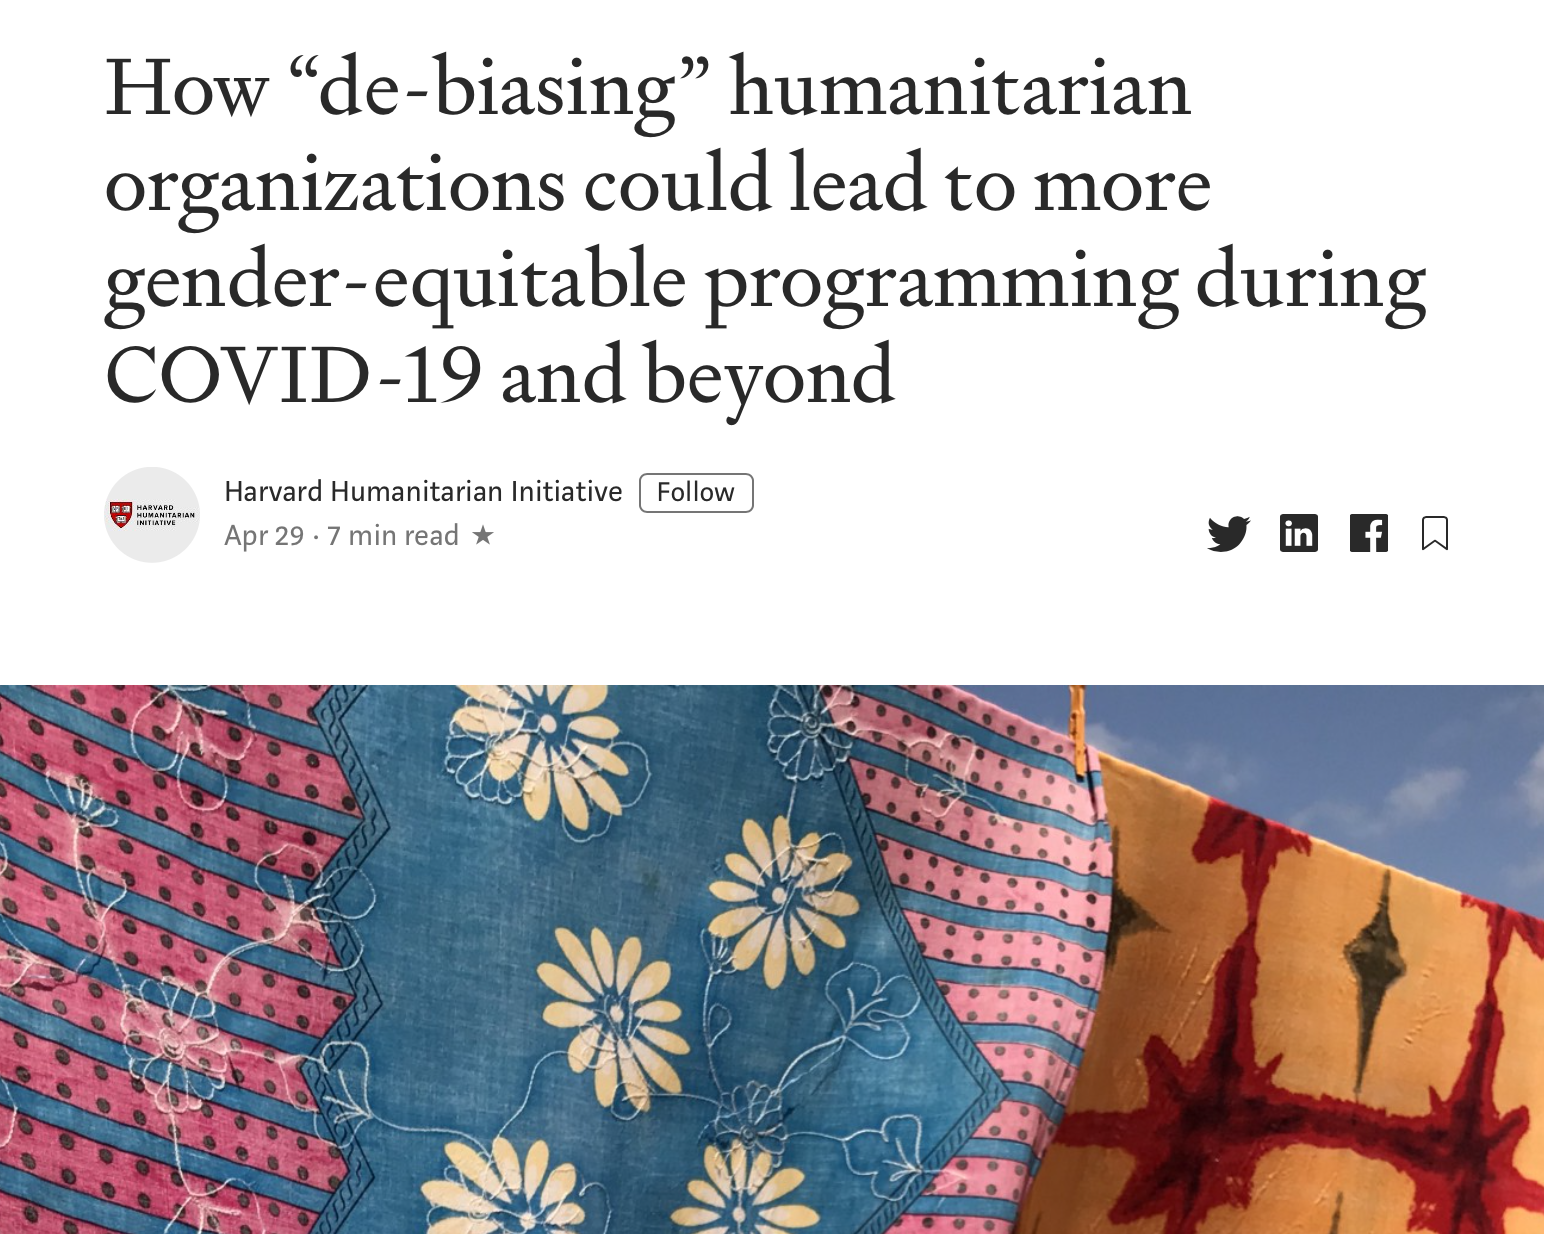 How “de-biasing” humanitarian organizations could lead to more gender-equitable programming during COVID-19 and beyond